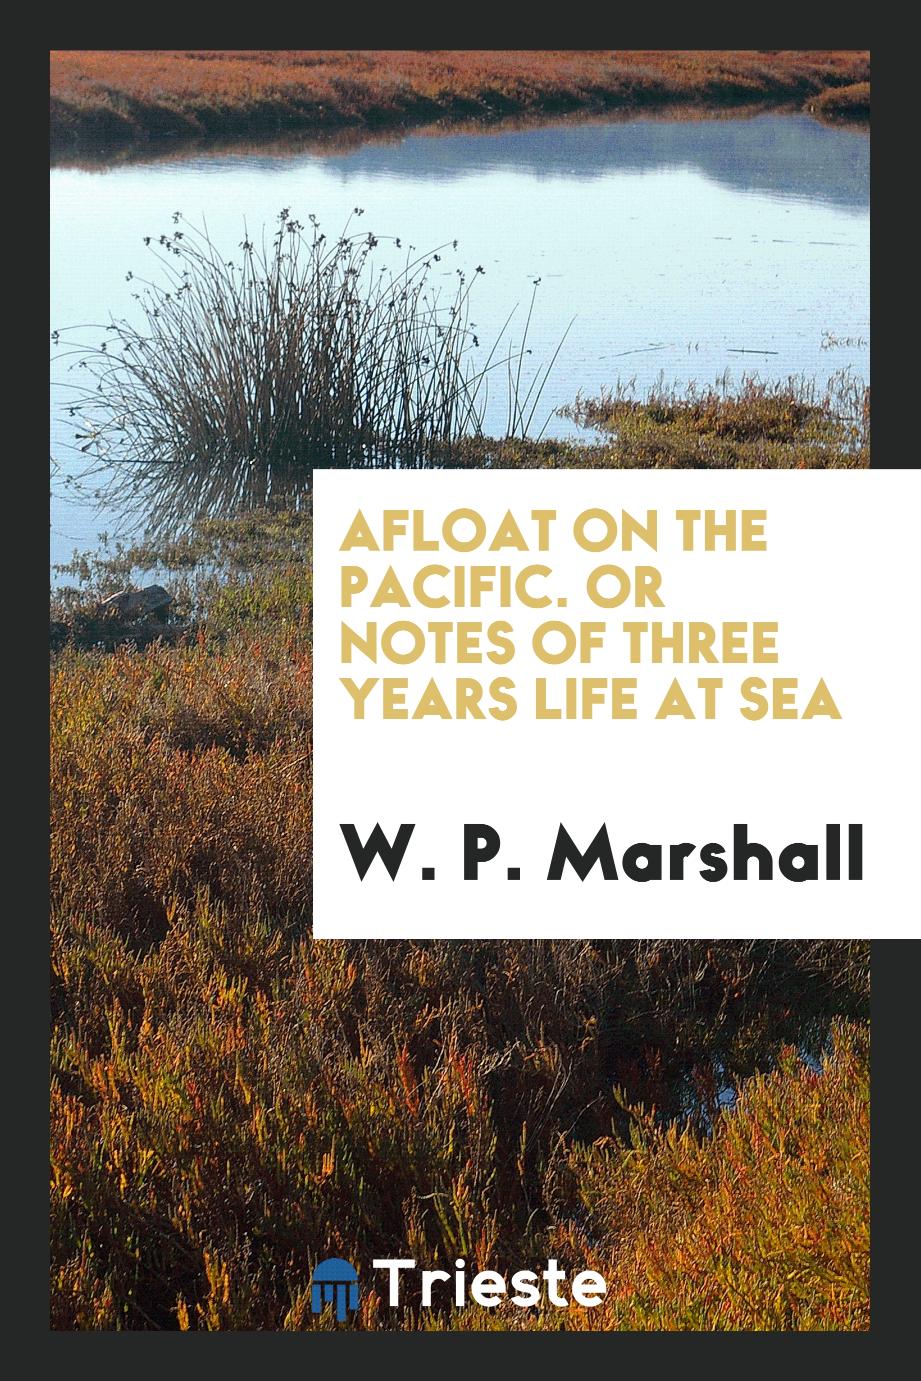 Afloat on the Pacific. Or Notes of Three Years Life at Sea